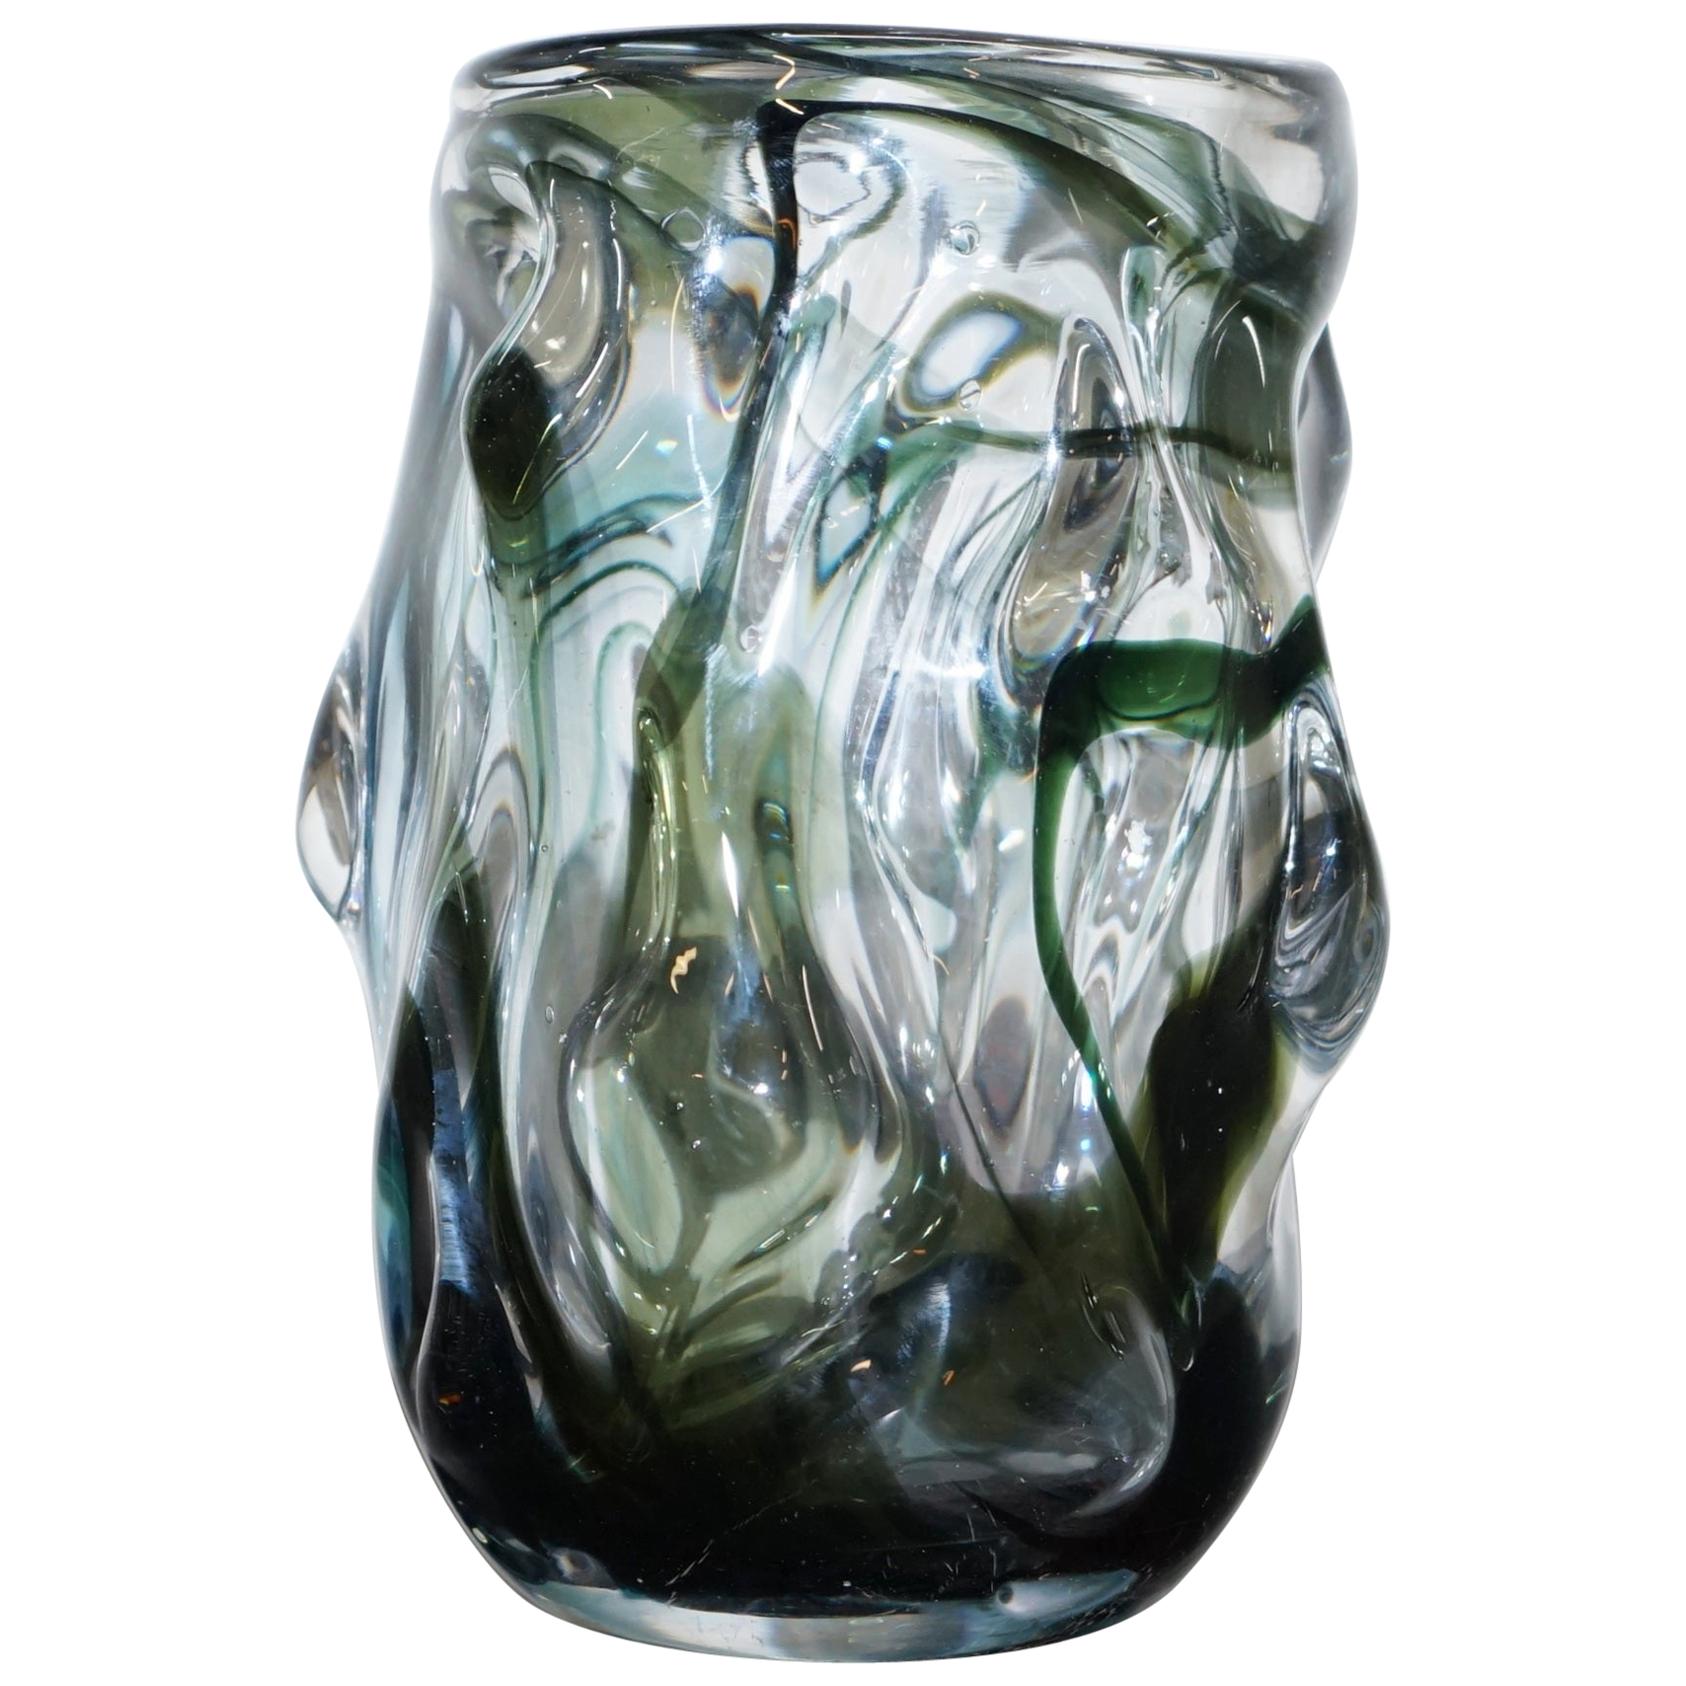 One of Three Stunning Whitefrairs Vases with Ornately Crafted Bodies, Medium